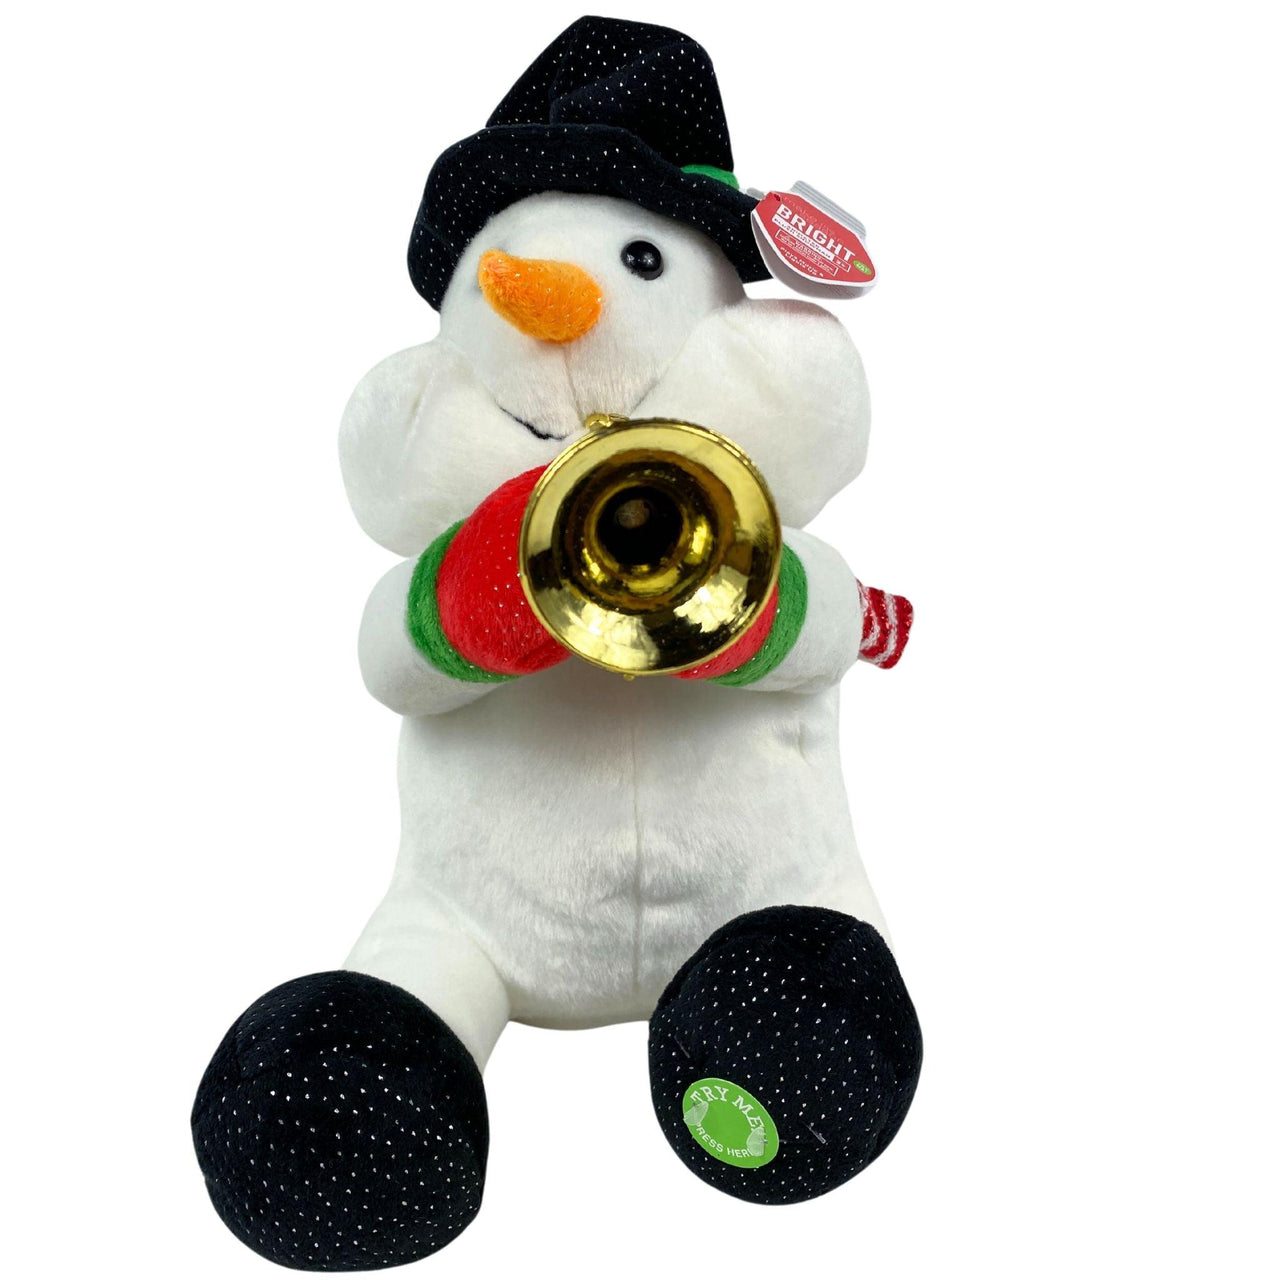 Make The Season Bright Animated Plush Snowman With Trumpet Ages3+ Plays Music & Lights Up (24 Pcs Lot) - Discount Wholesalers Inc